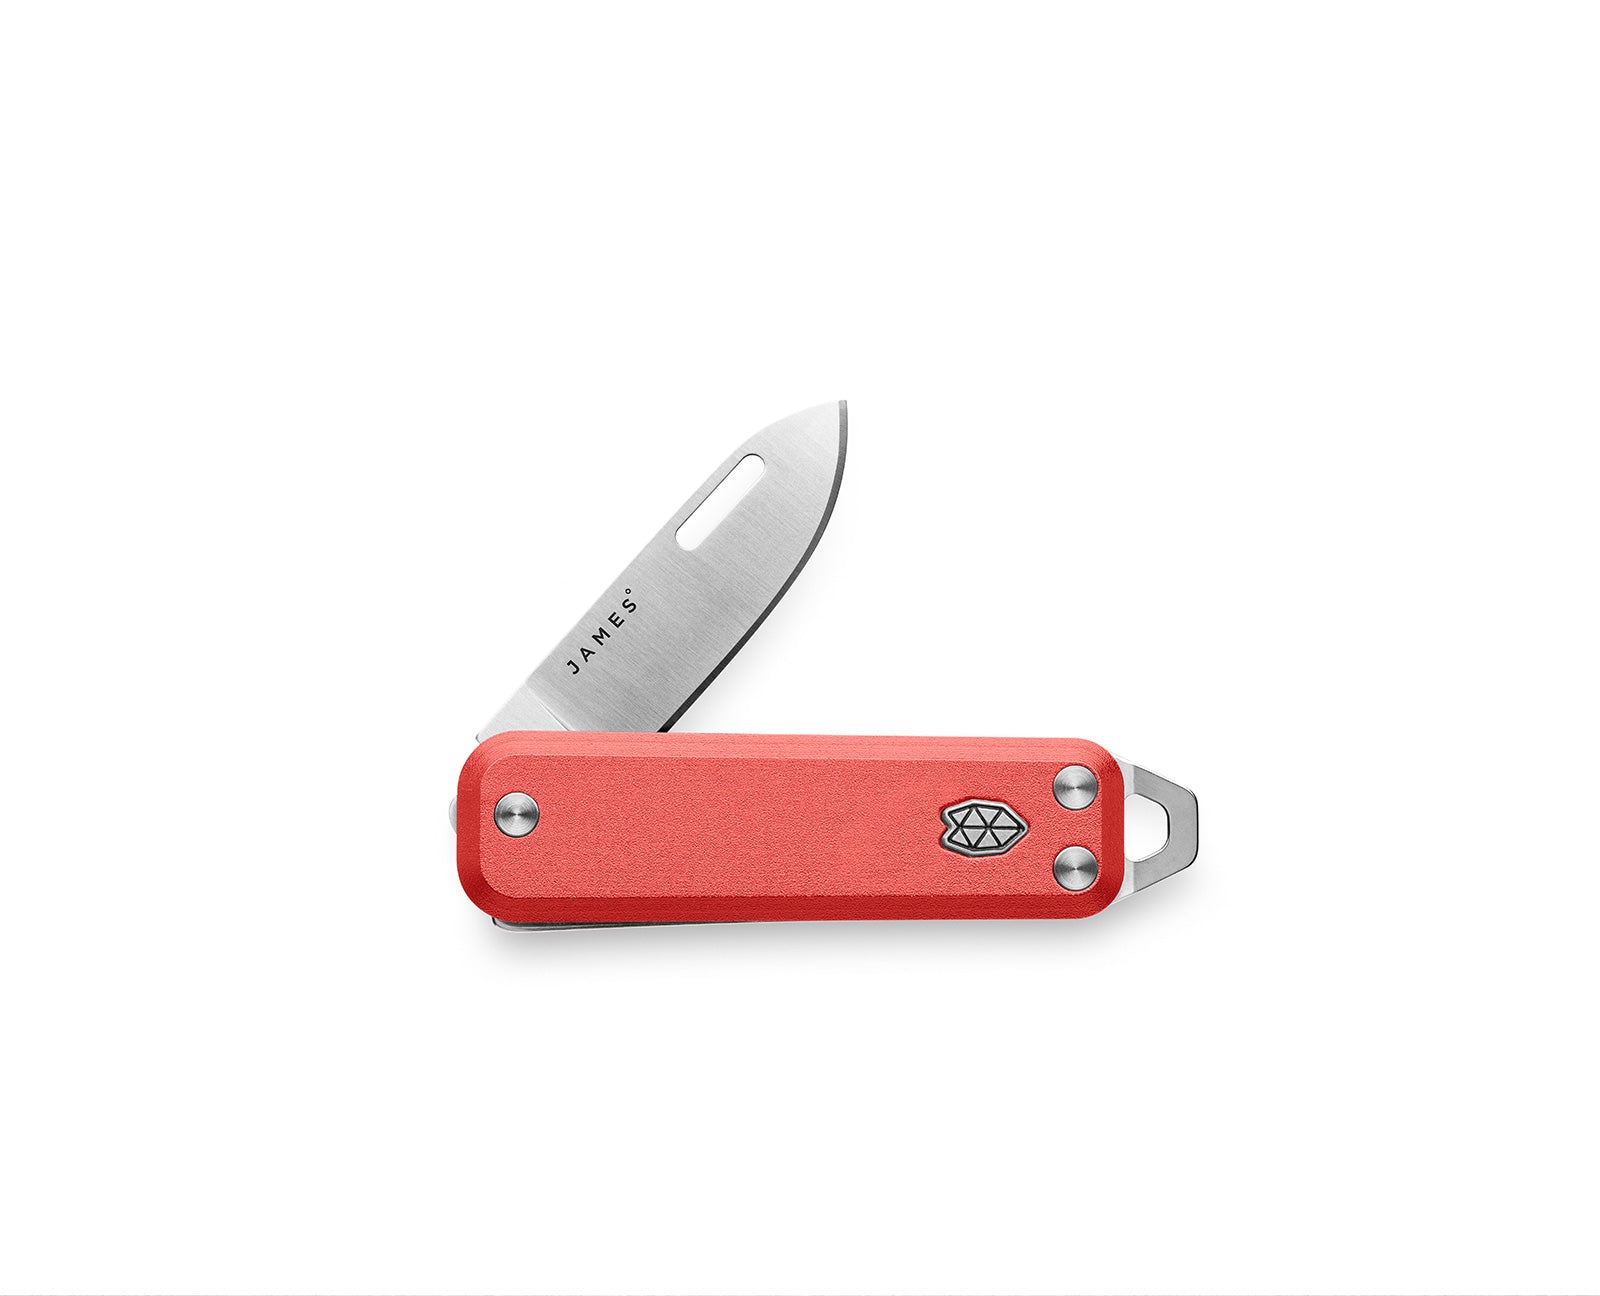 The Elko knife with coral handle and stainless steel blade.